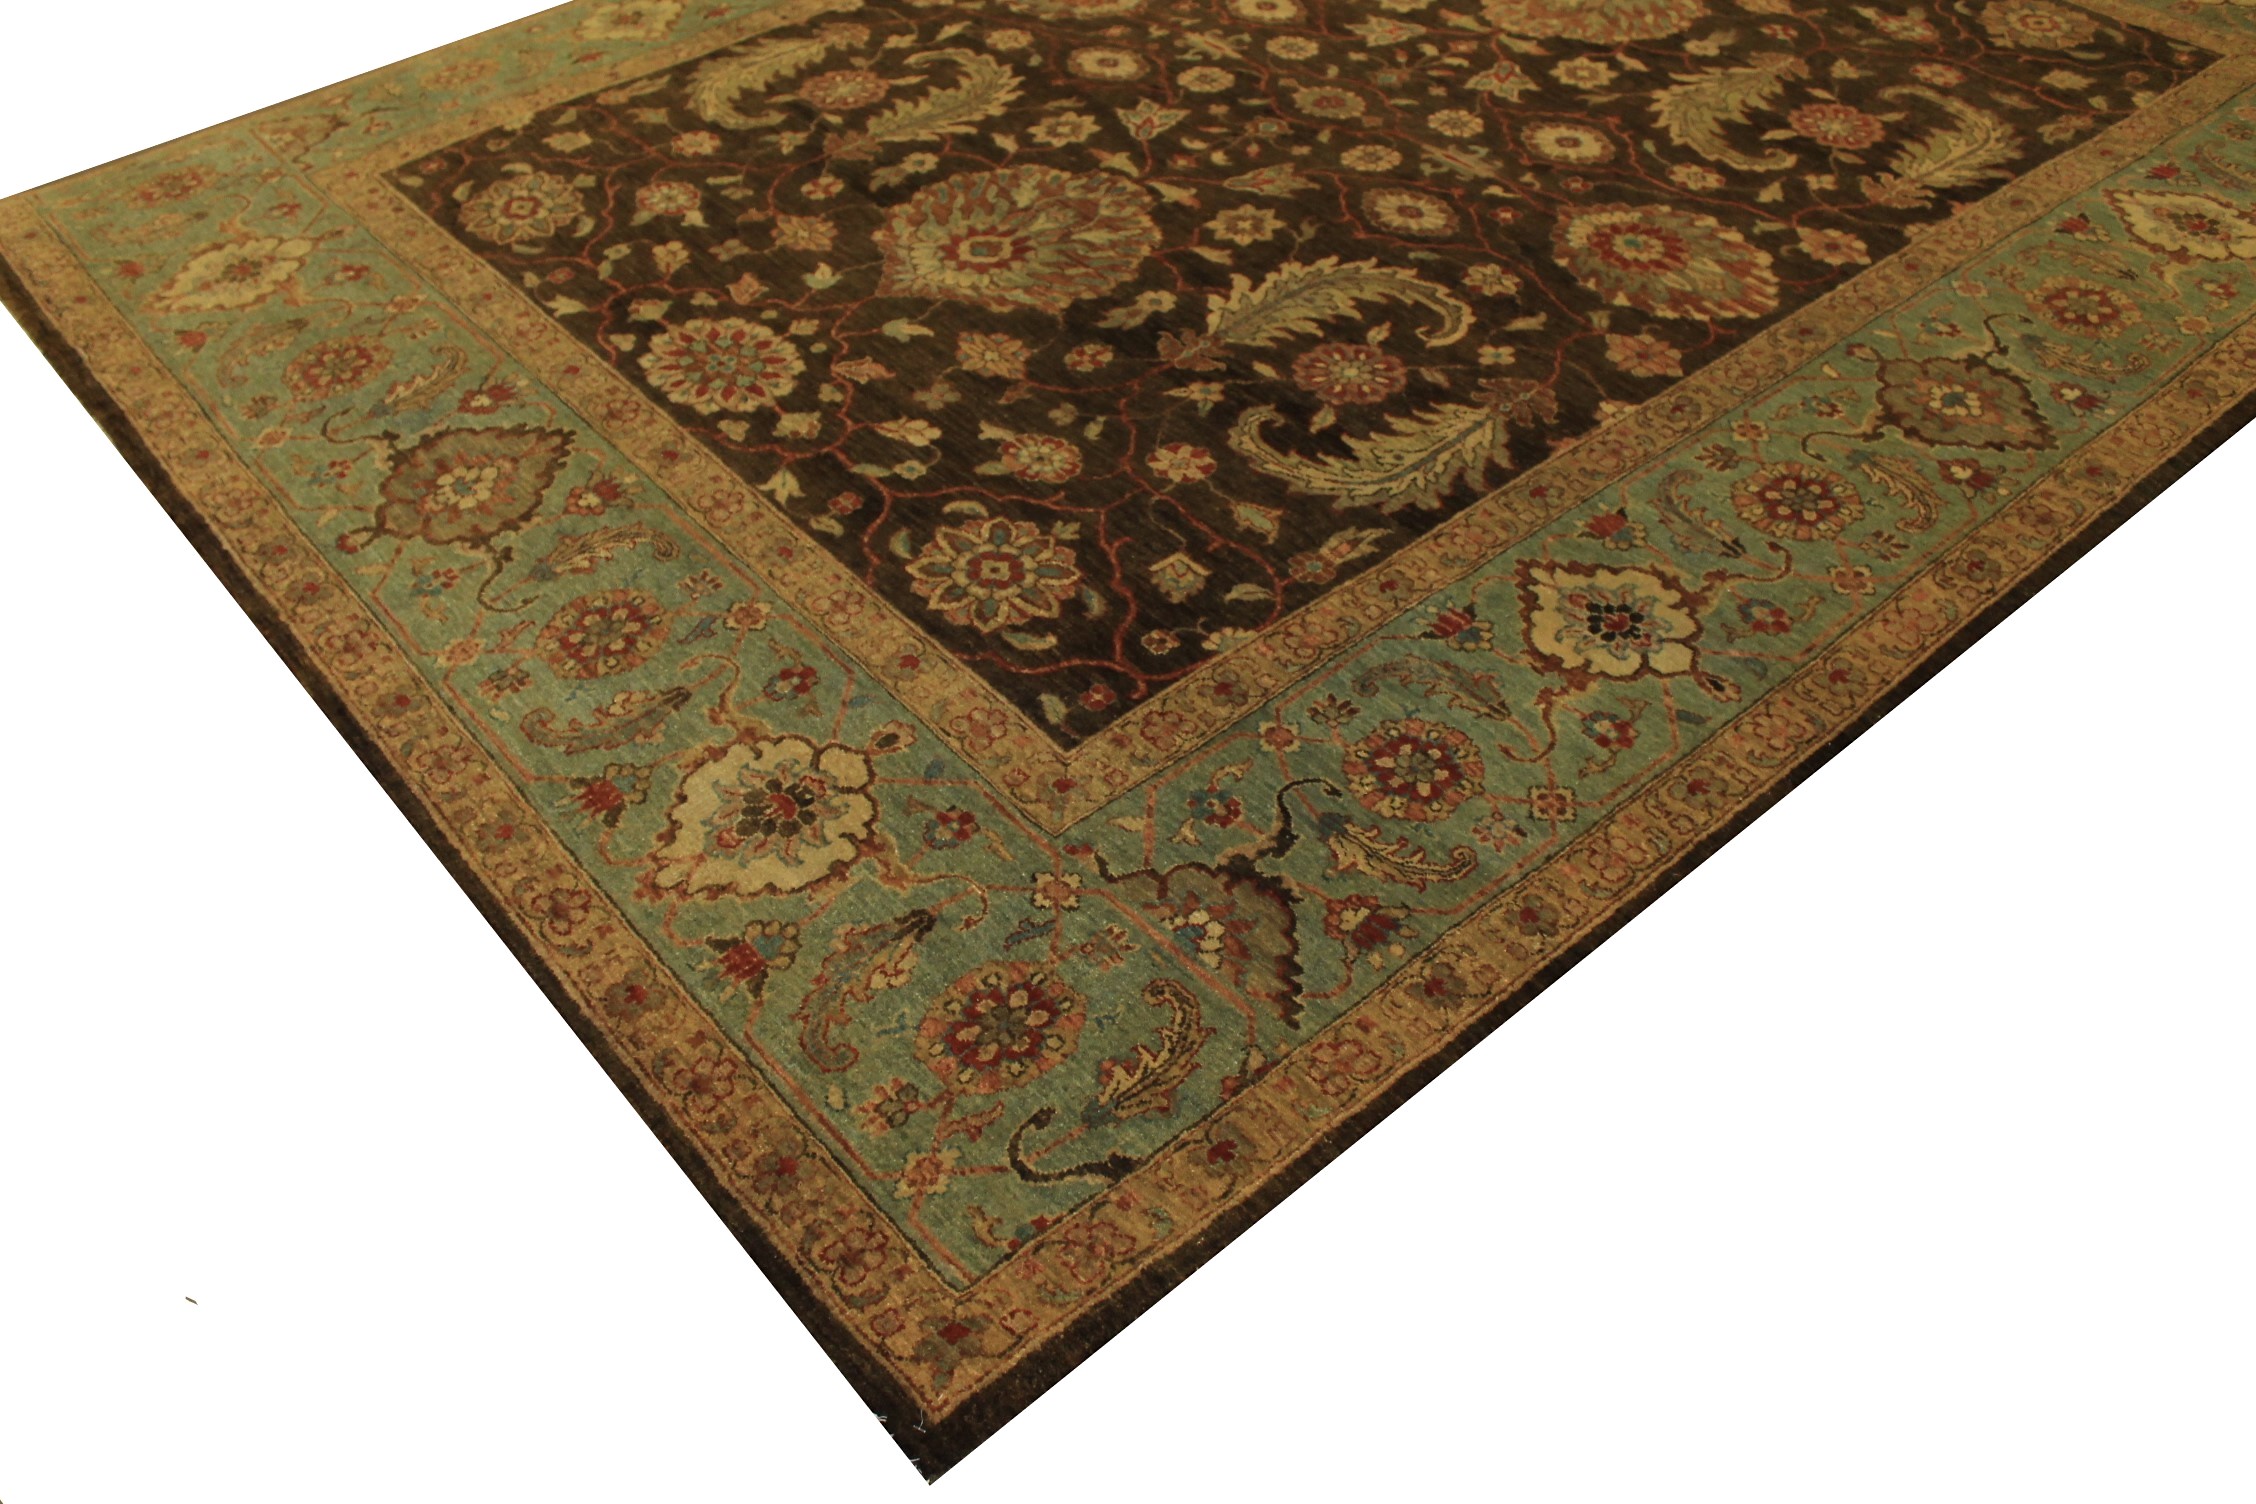 8x10 Antique Revival Hand Knotted Wool Area Rug - MR12345